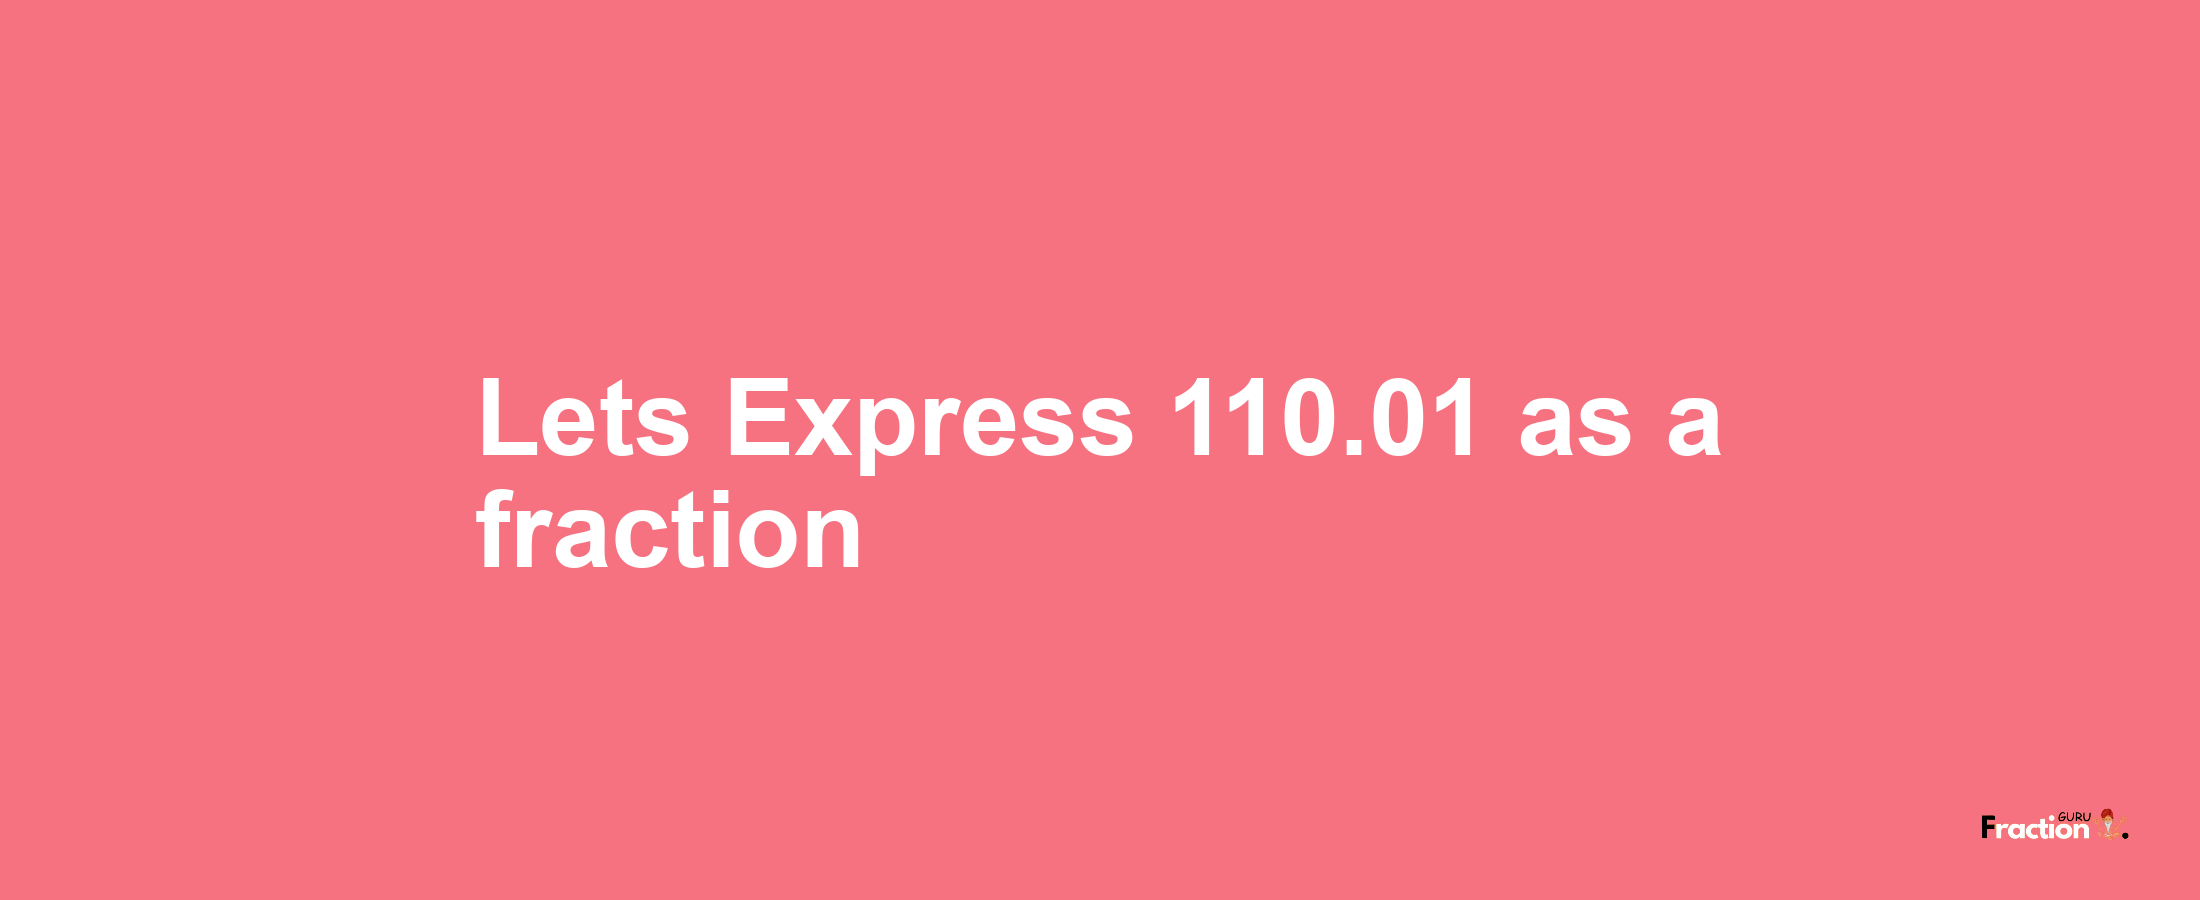 Lets Express 110.01 as afraction